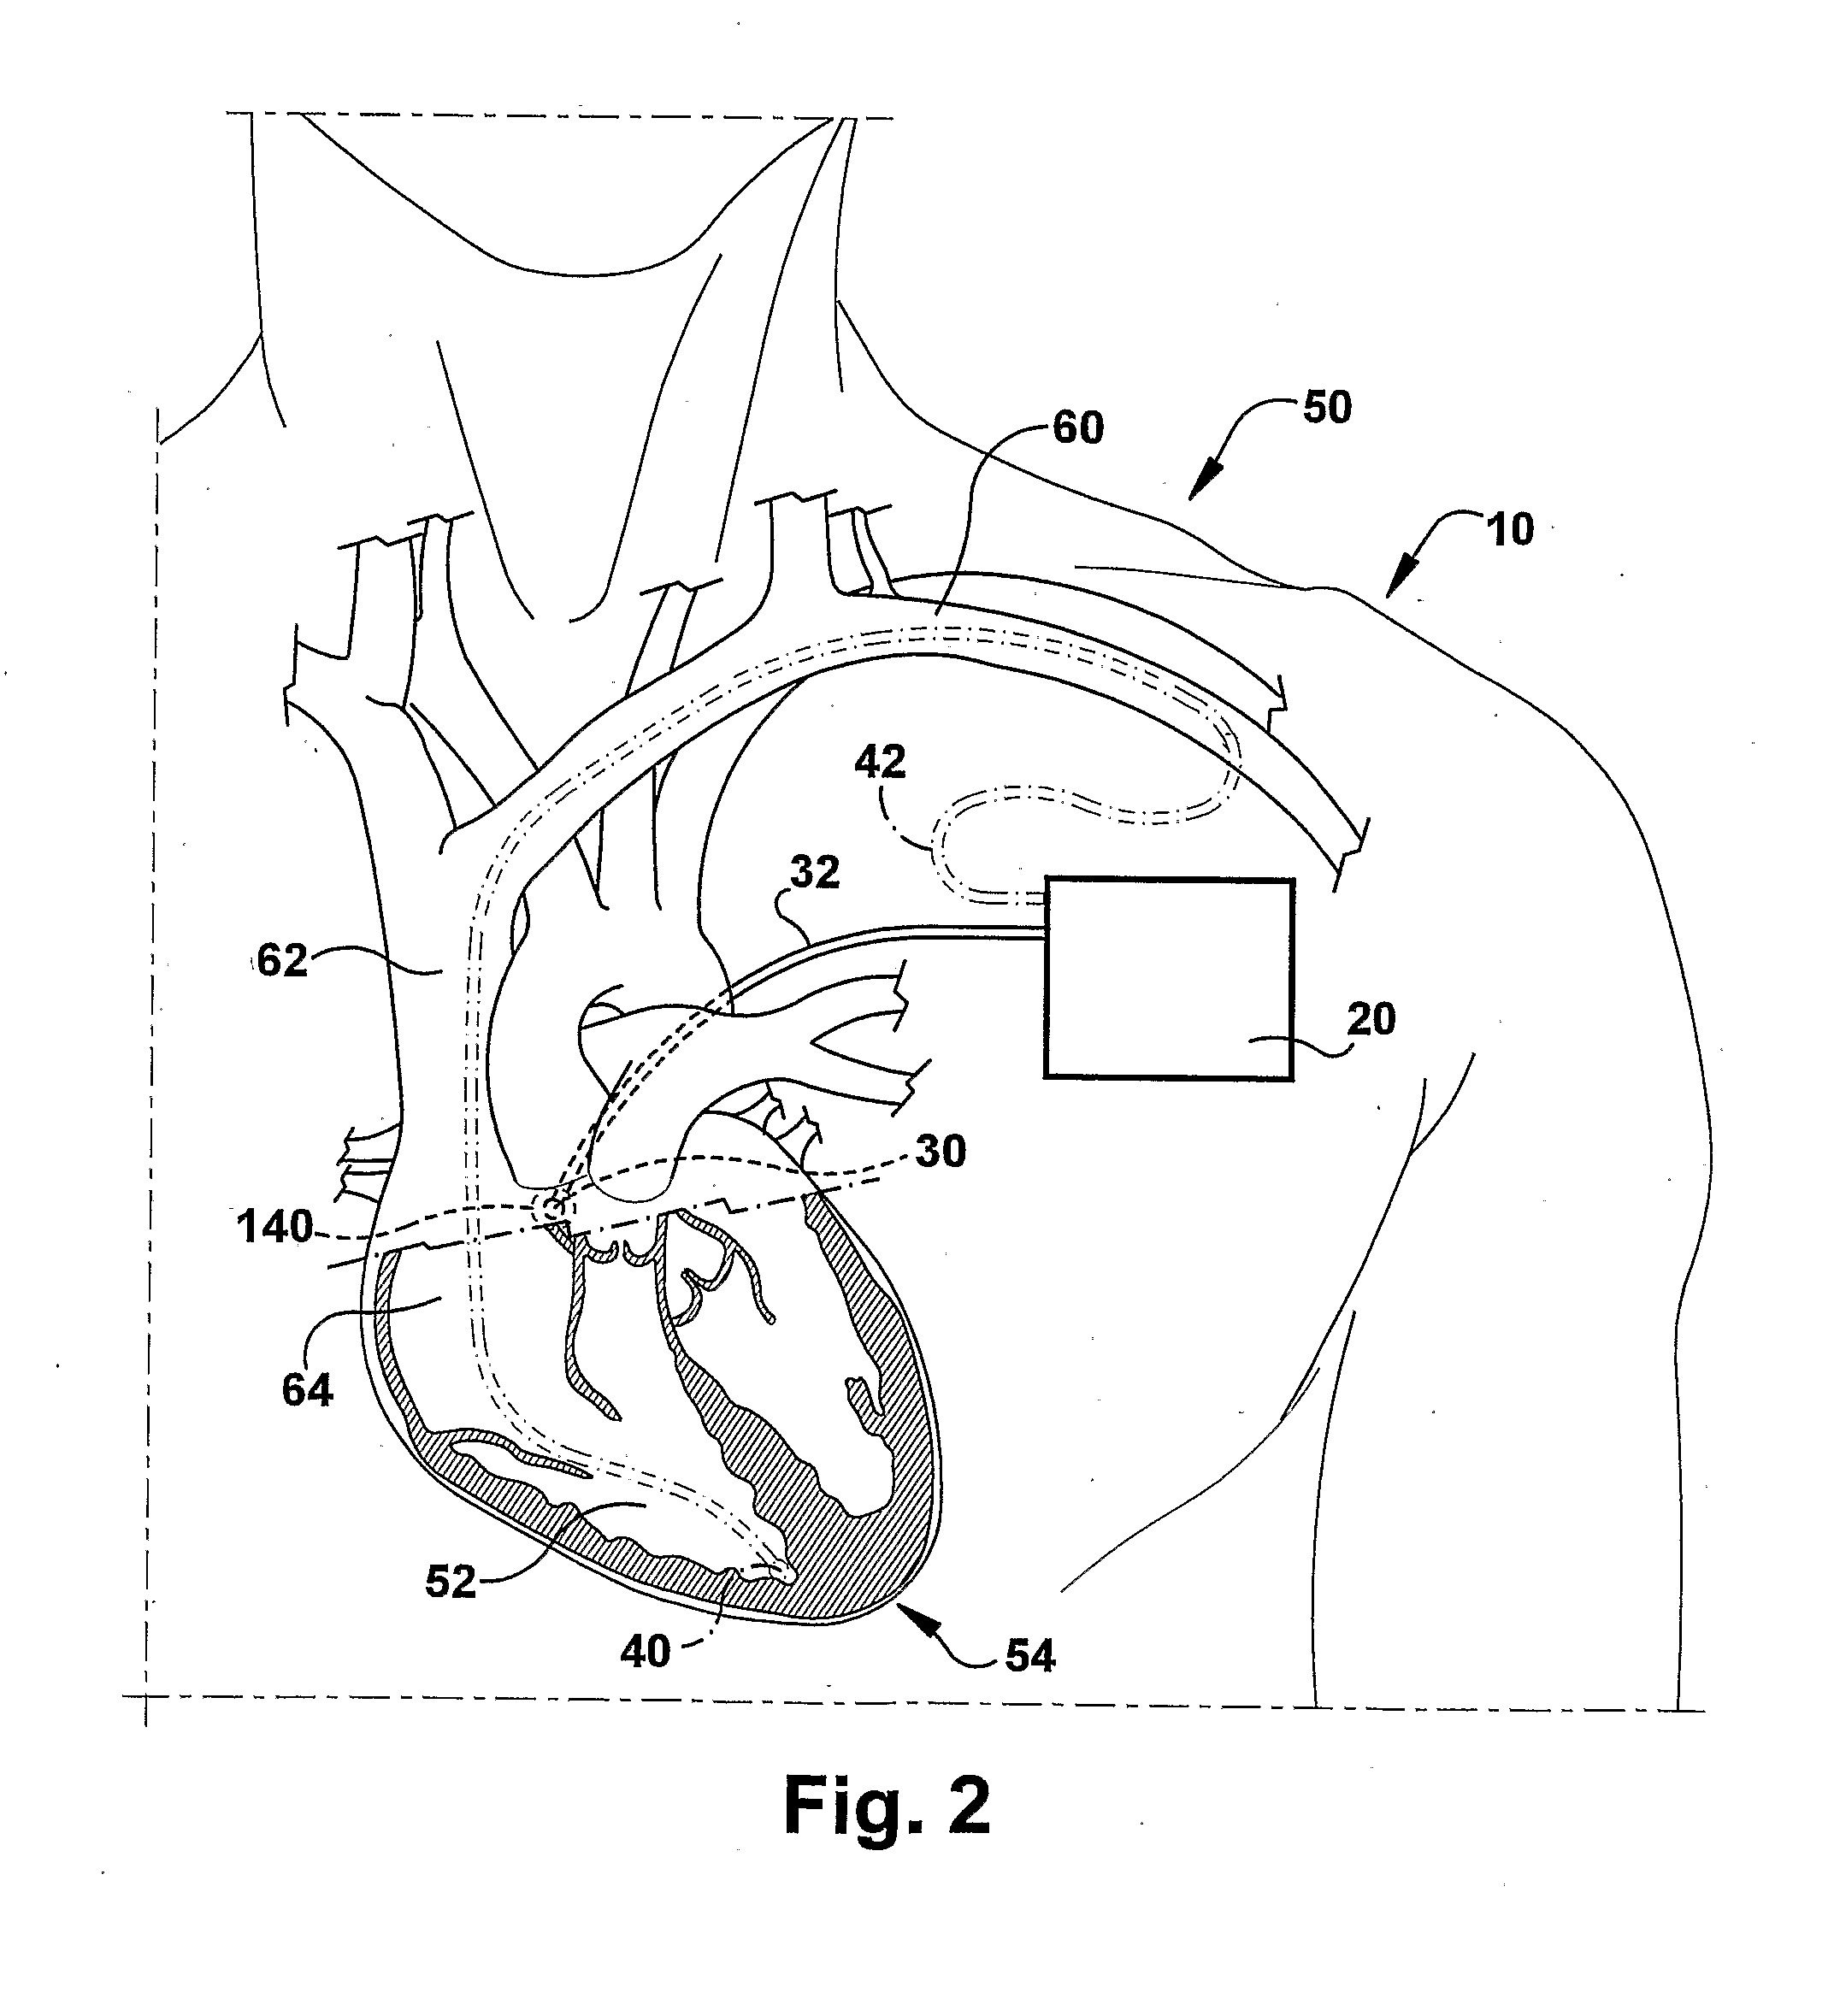 System and Method for Achieving Regular Slow Ventricular Rhythm in Response to Atrial Fibrillation